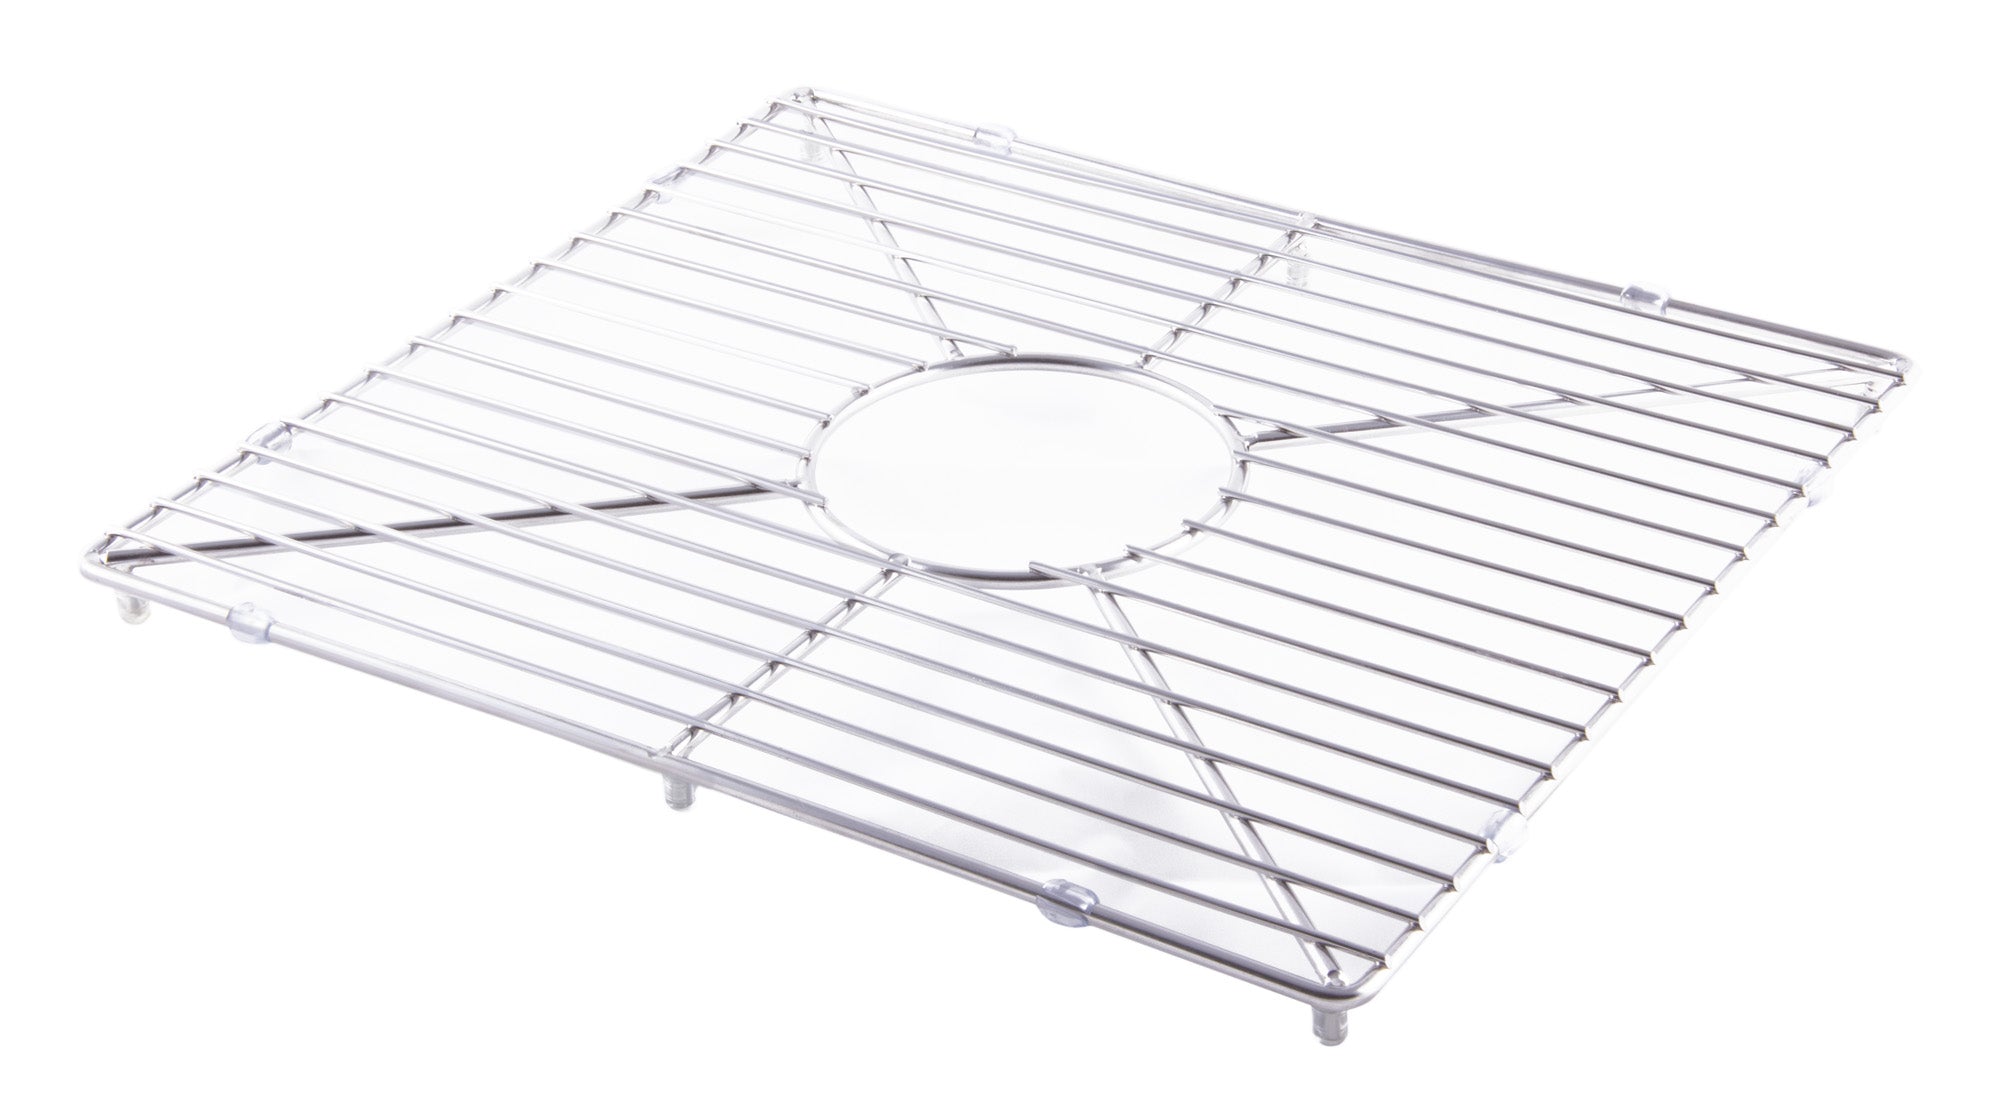 ALFI Brand - Stainless steel kitchen sink grid for AB3918DB, AB3918ARCH | ABGR3918